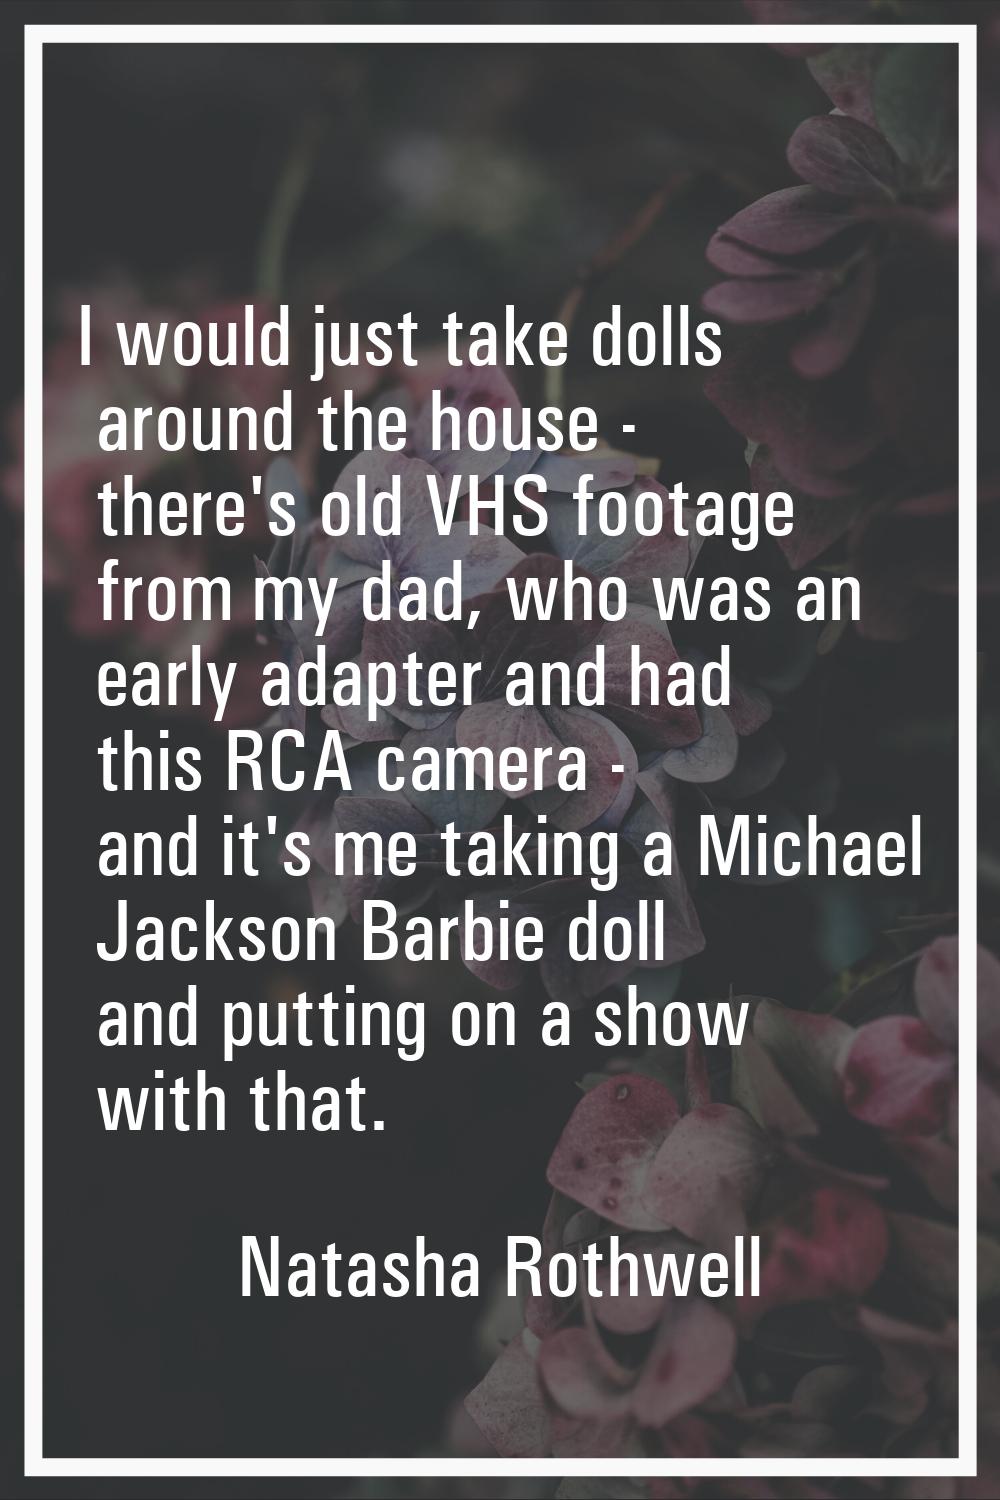 I would just take dolls around the house - there's old VHS footage from my dad, who was an early ad